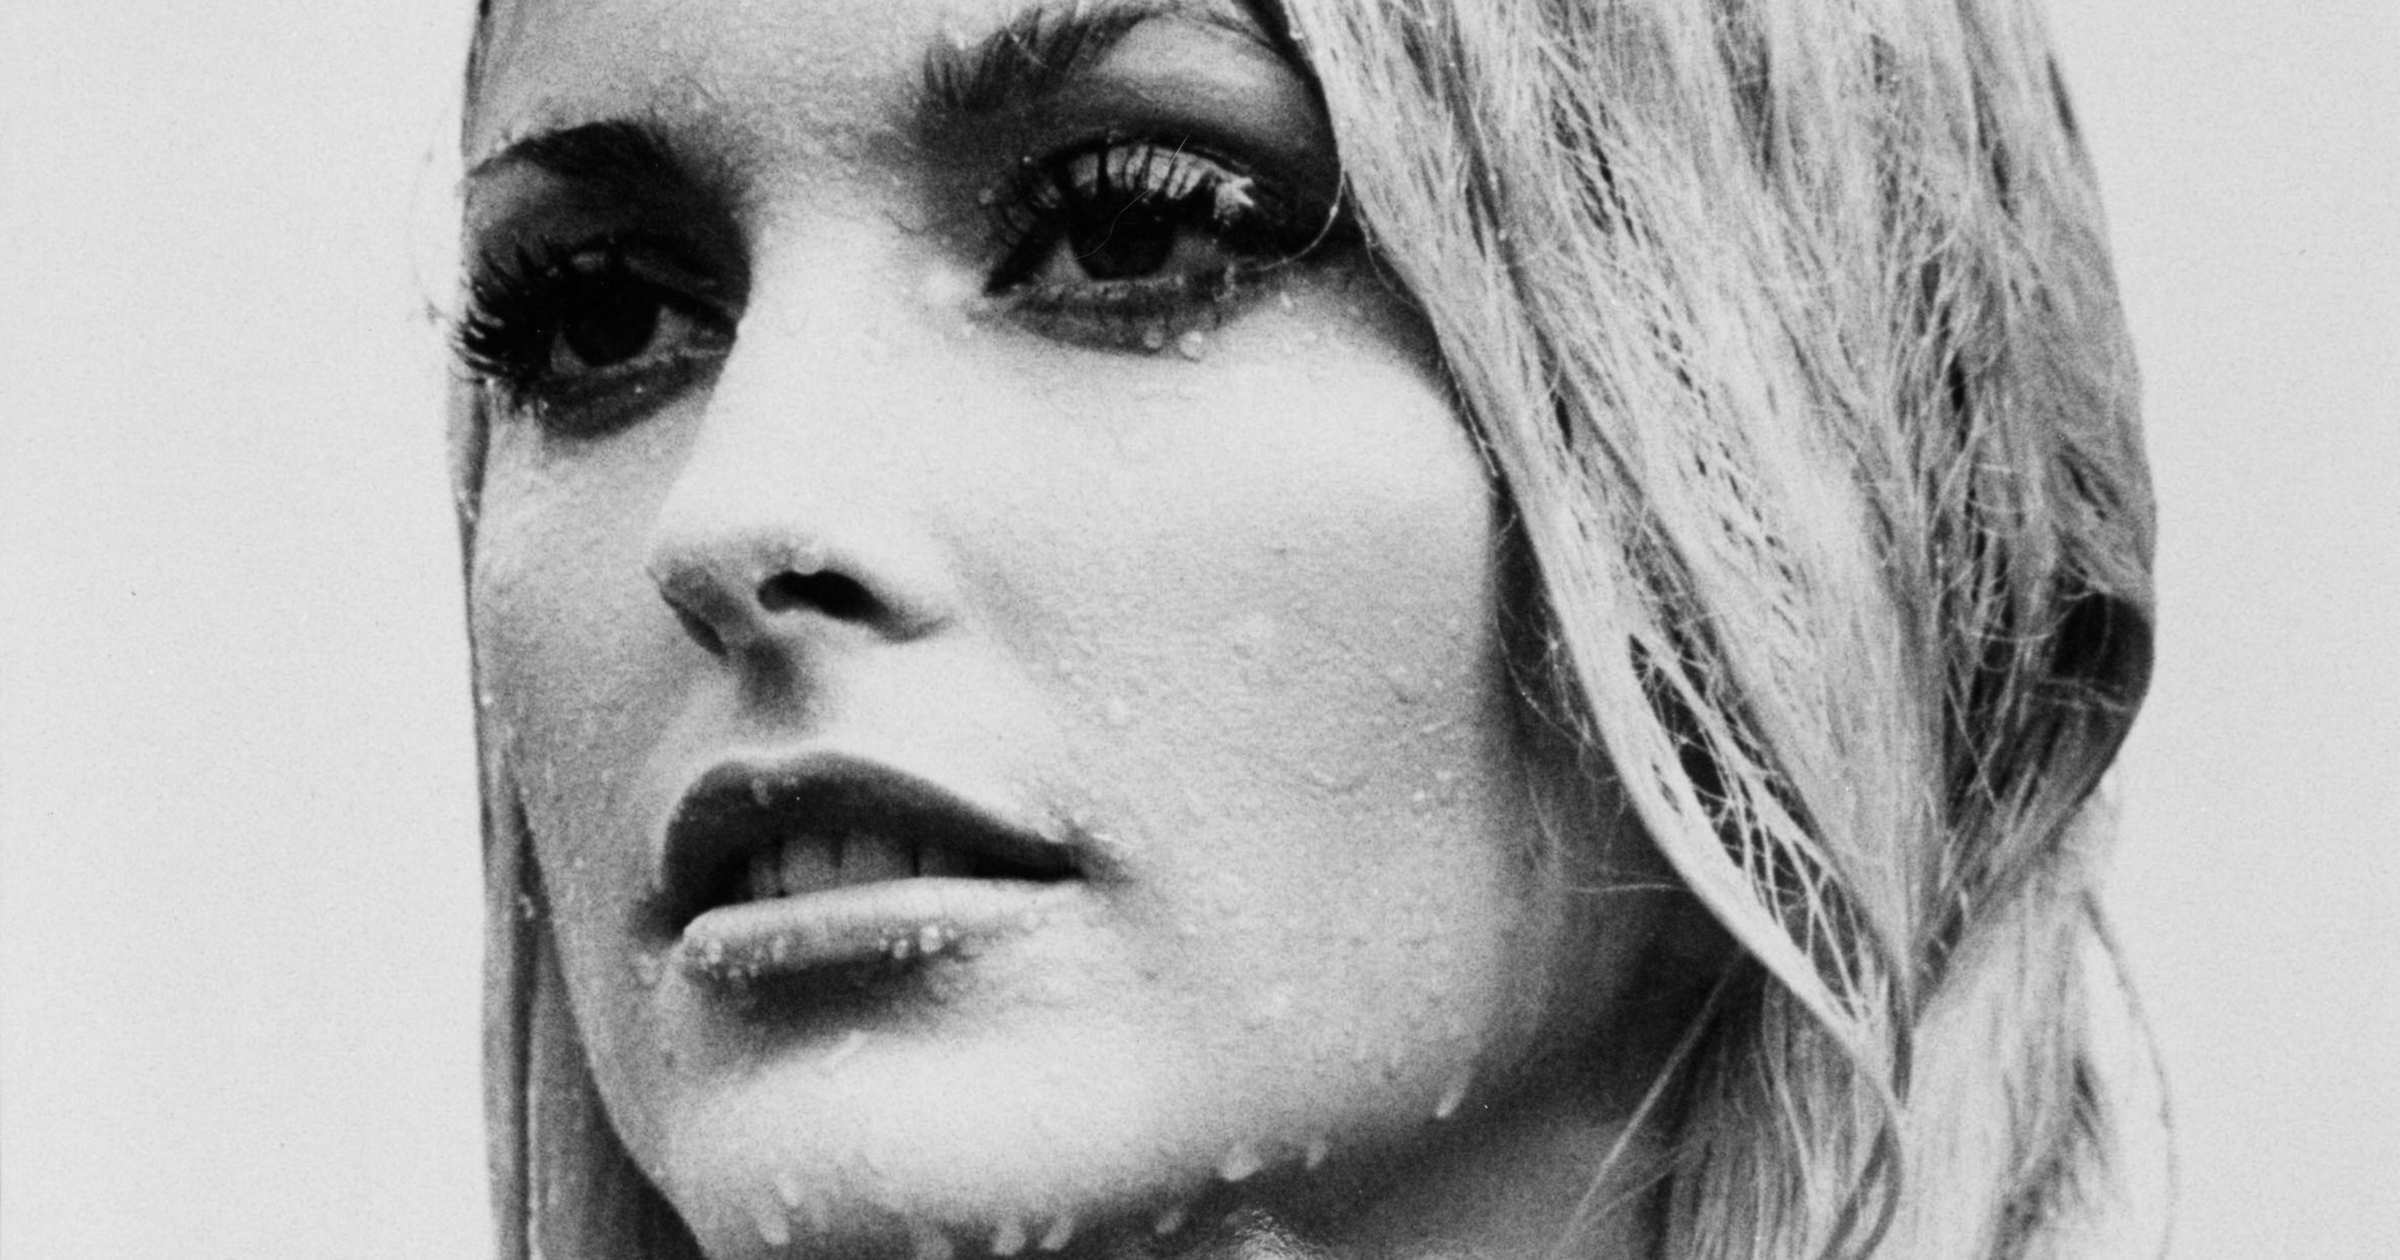 Sharon Tate Wallpaper Image Photos Pictures Background